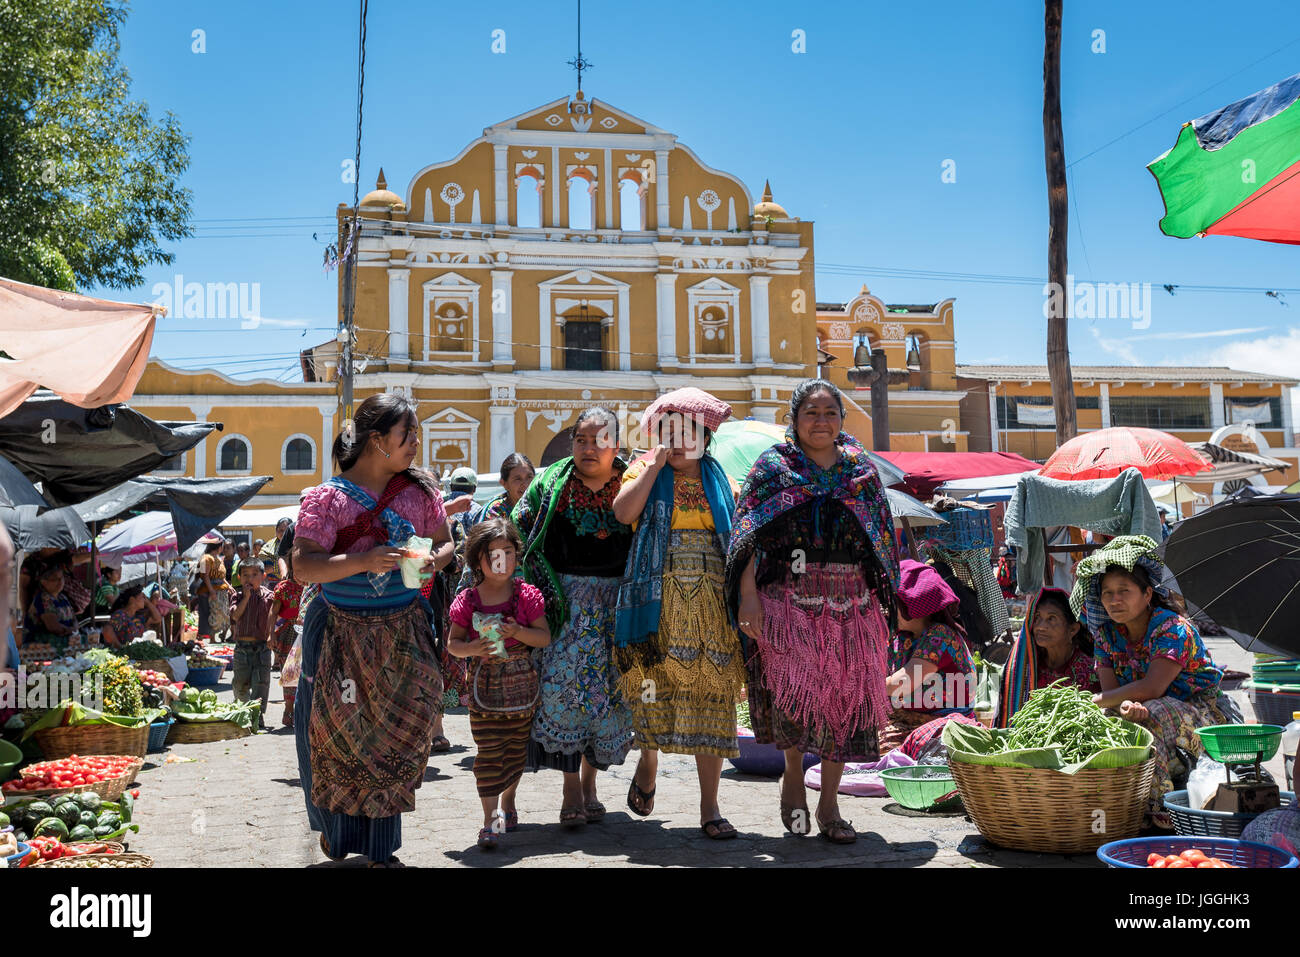 Several women of mixed ages in the typical native dress at the market in Guatemala Stock Photo